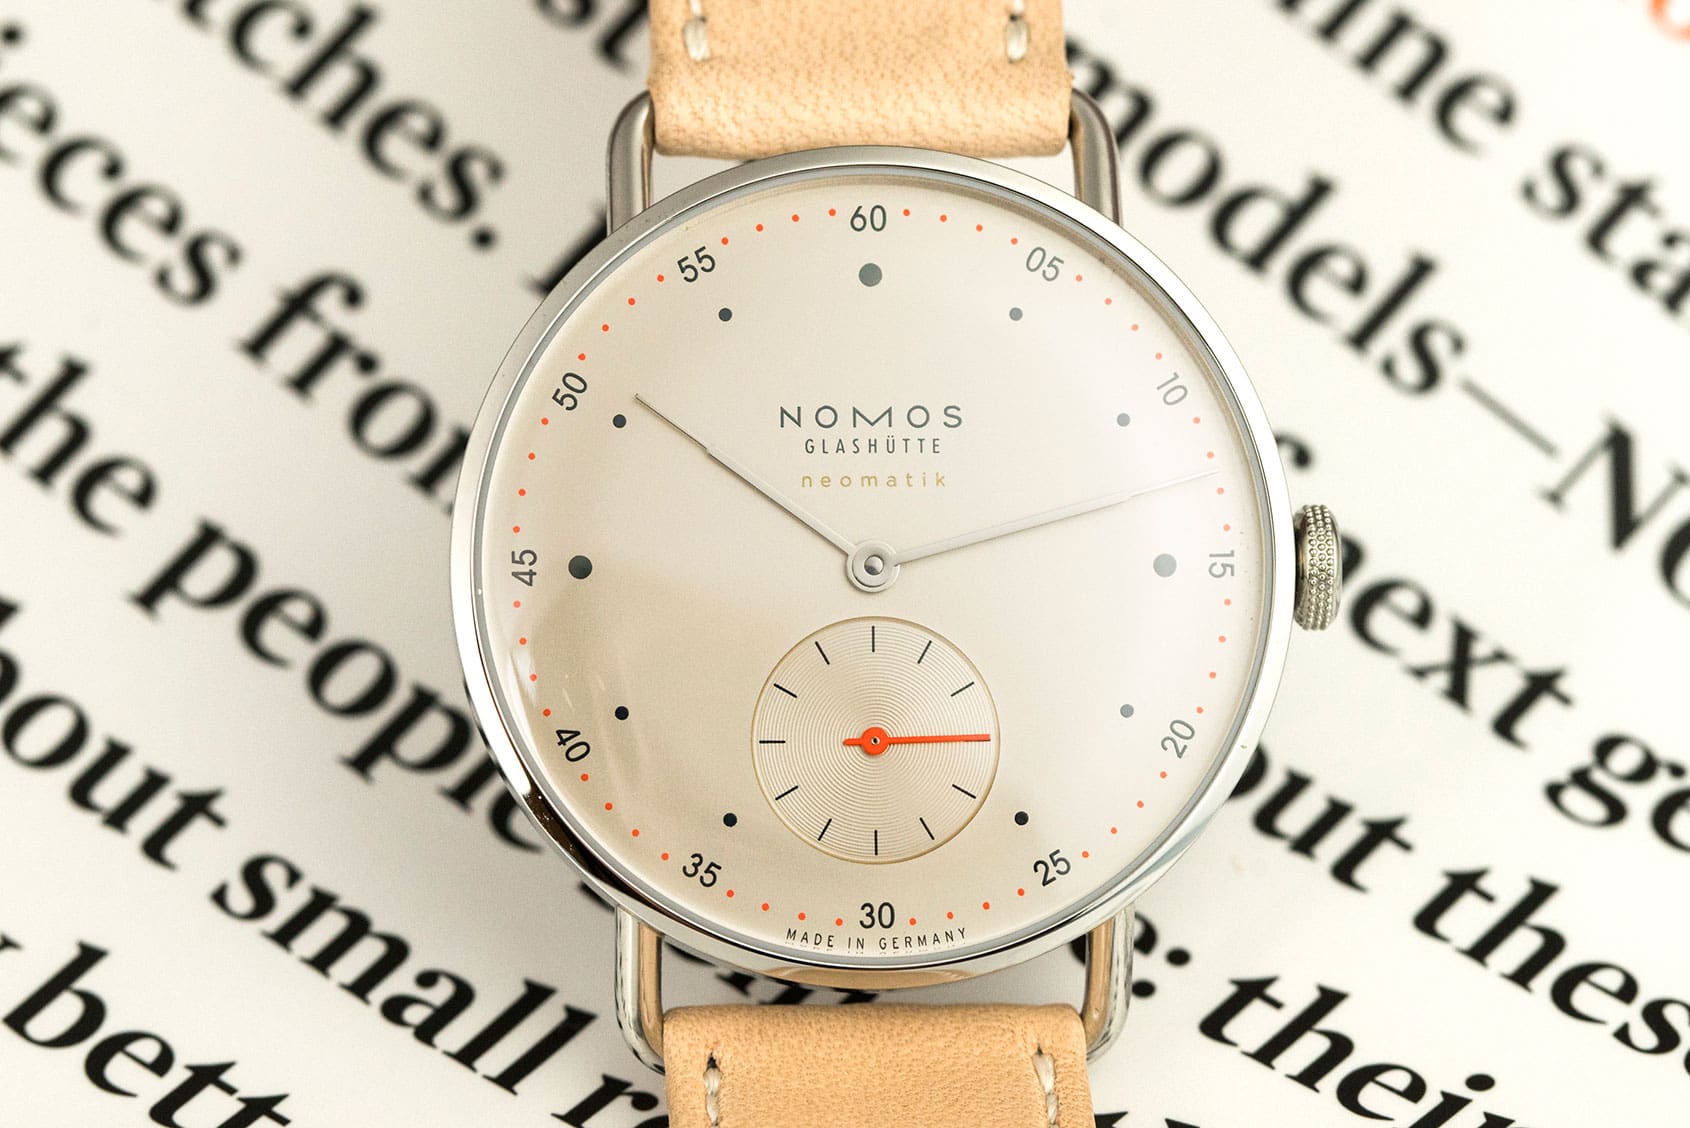 HANDS-ON: the Metro neomatik Champagner – a new look for Nomos